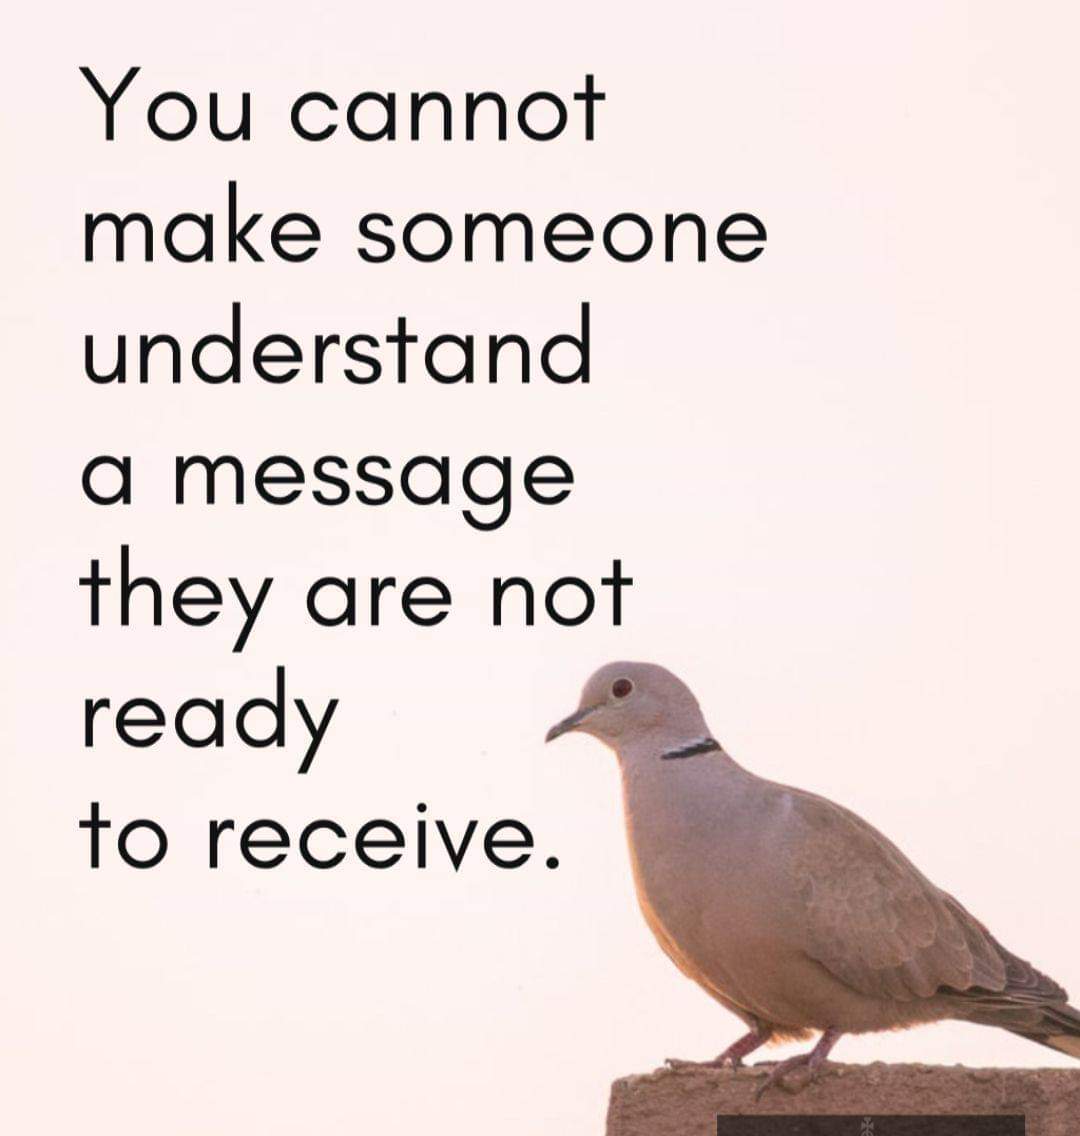 You canot make someone understand a message they are not ready to receive